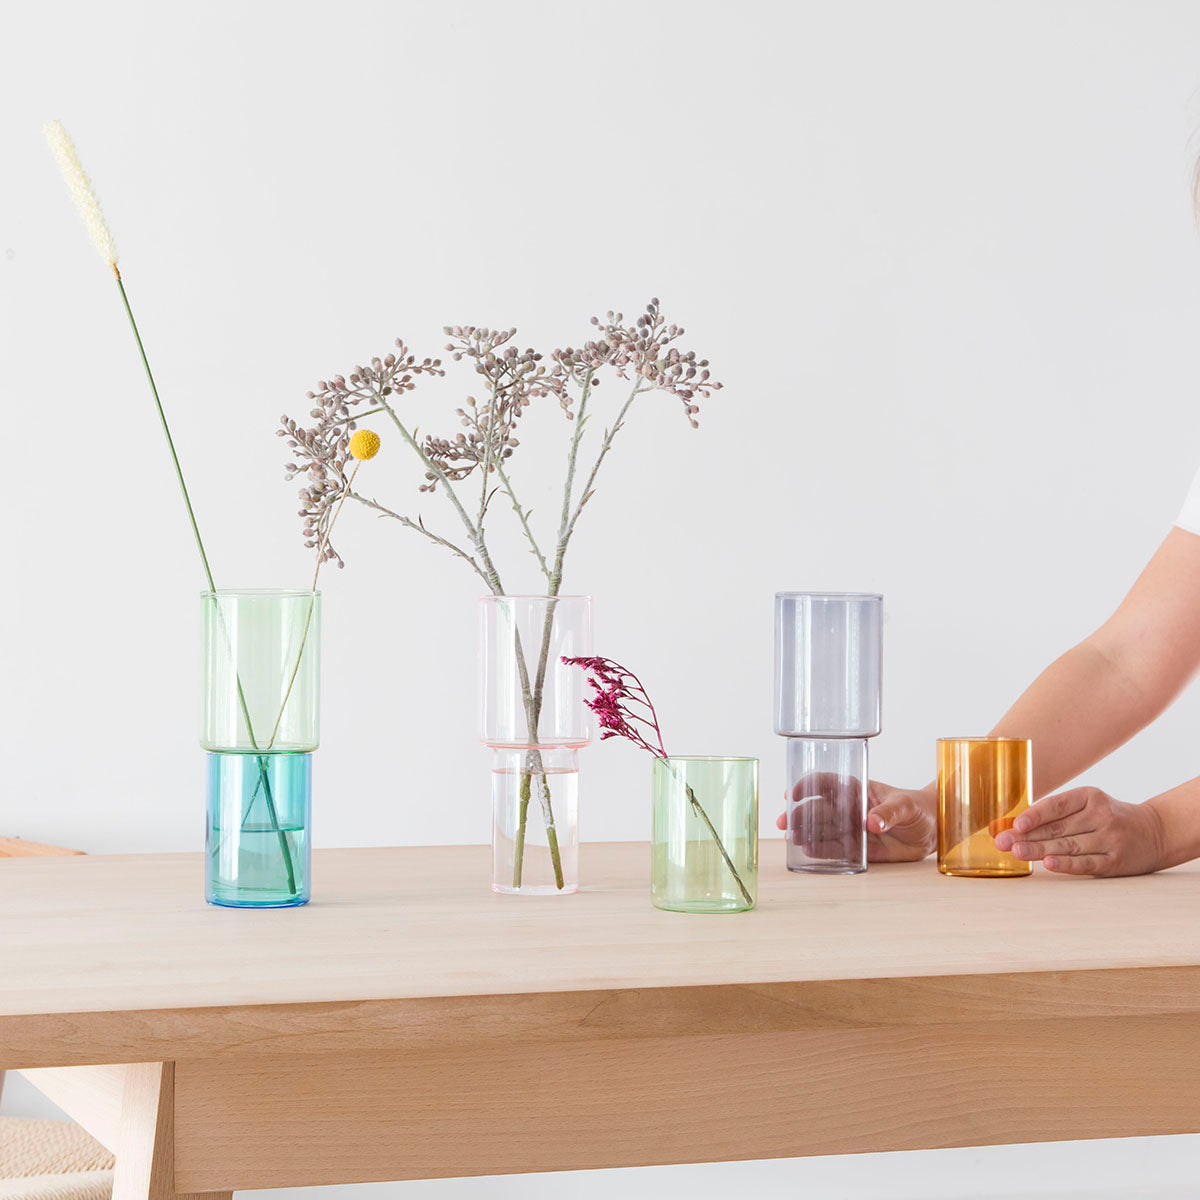 The Pink/Green stacking vase by Block Design is a cleverly versatile, three-way handmade glass vase crafted from borosilicate glass.